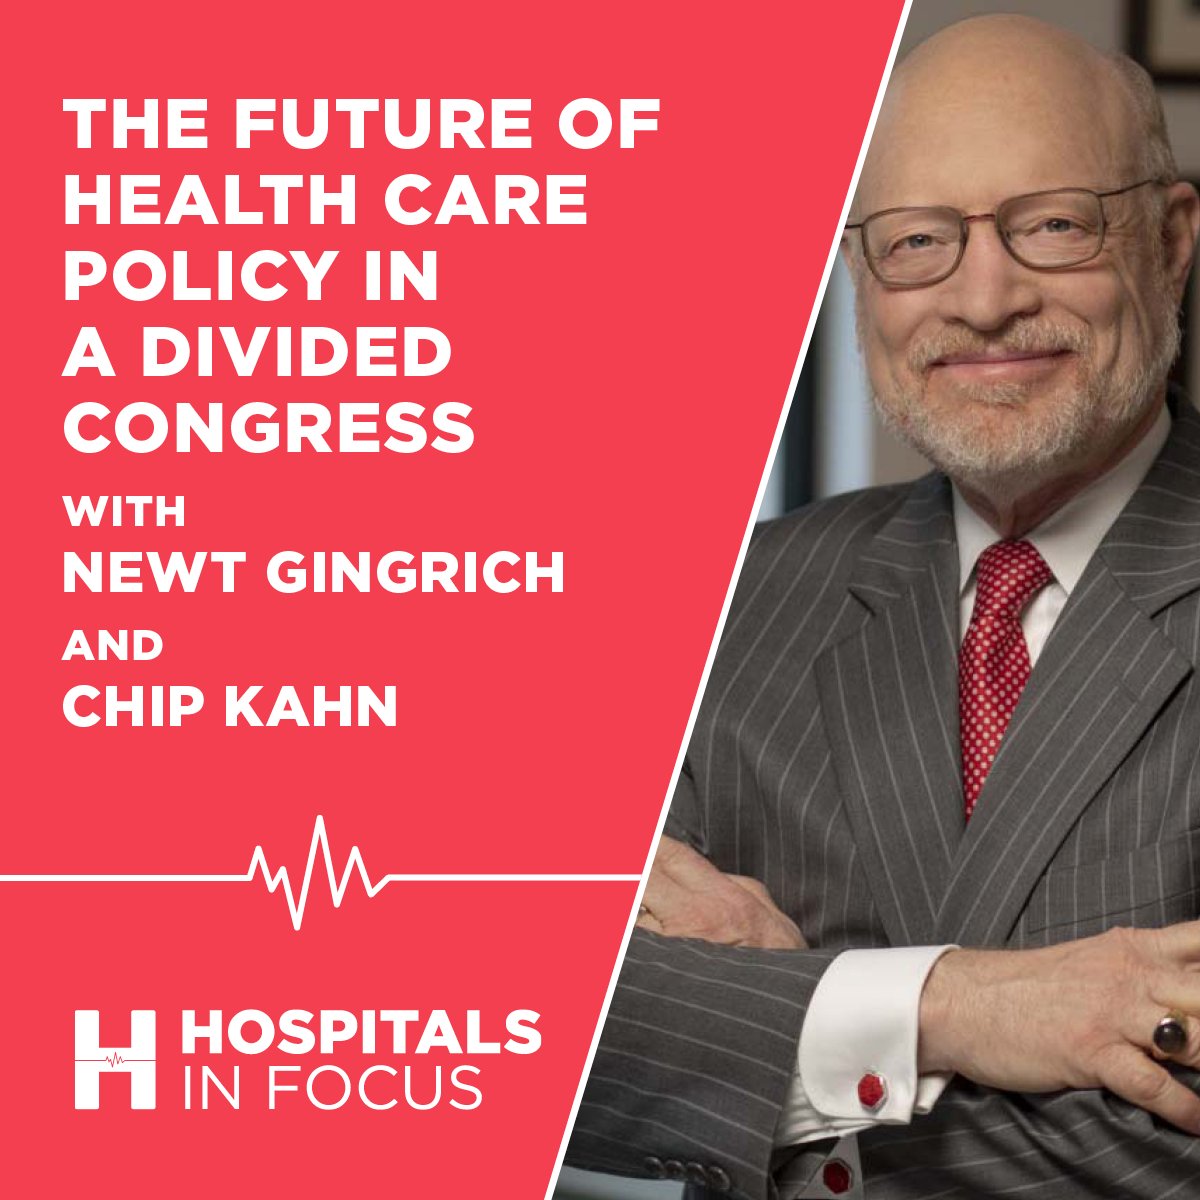 Have you had a chance to listen to our latest #HospitalsinFocus podcast episode with @NewtGingrich? A thoughtful & timely episode outlining what is at stake for health care policy in new Congress with observations from a living legend!